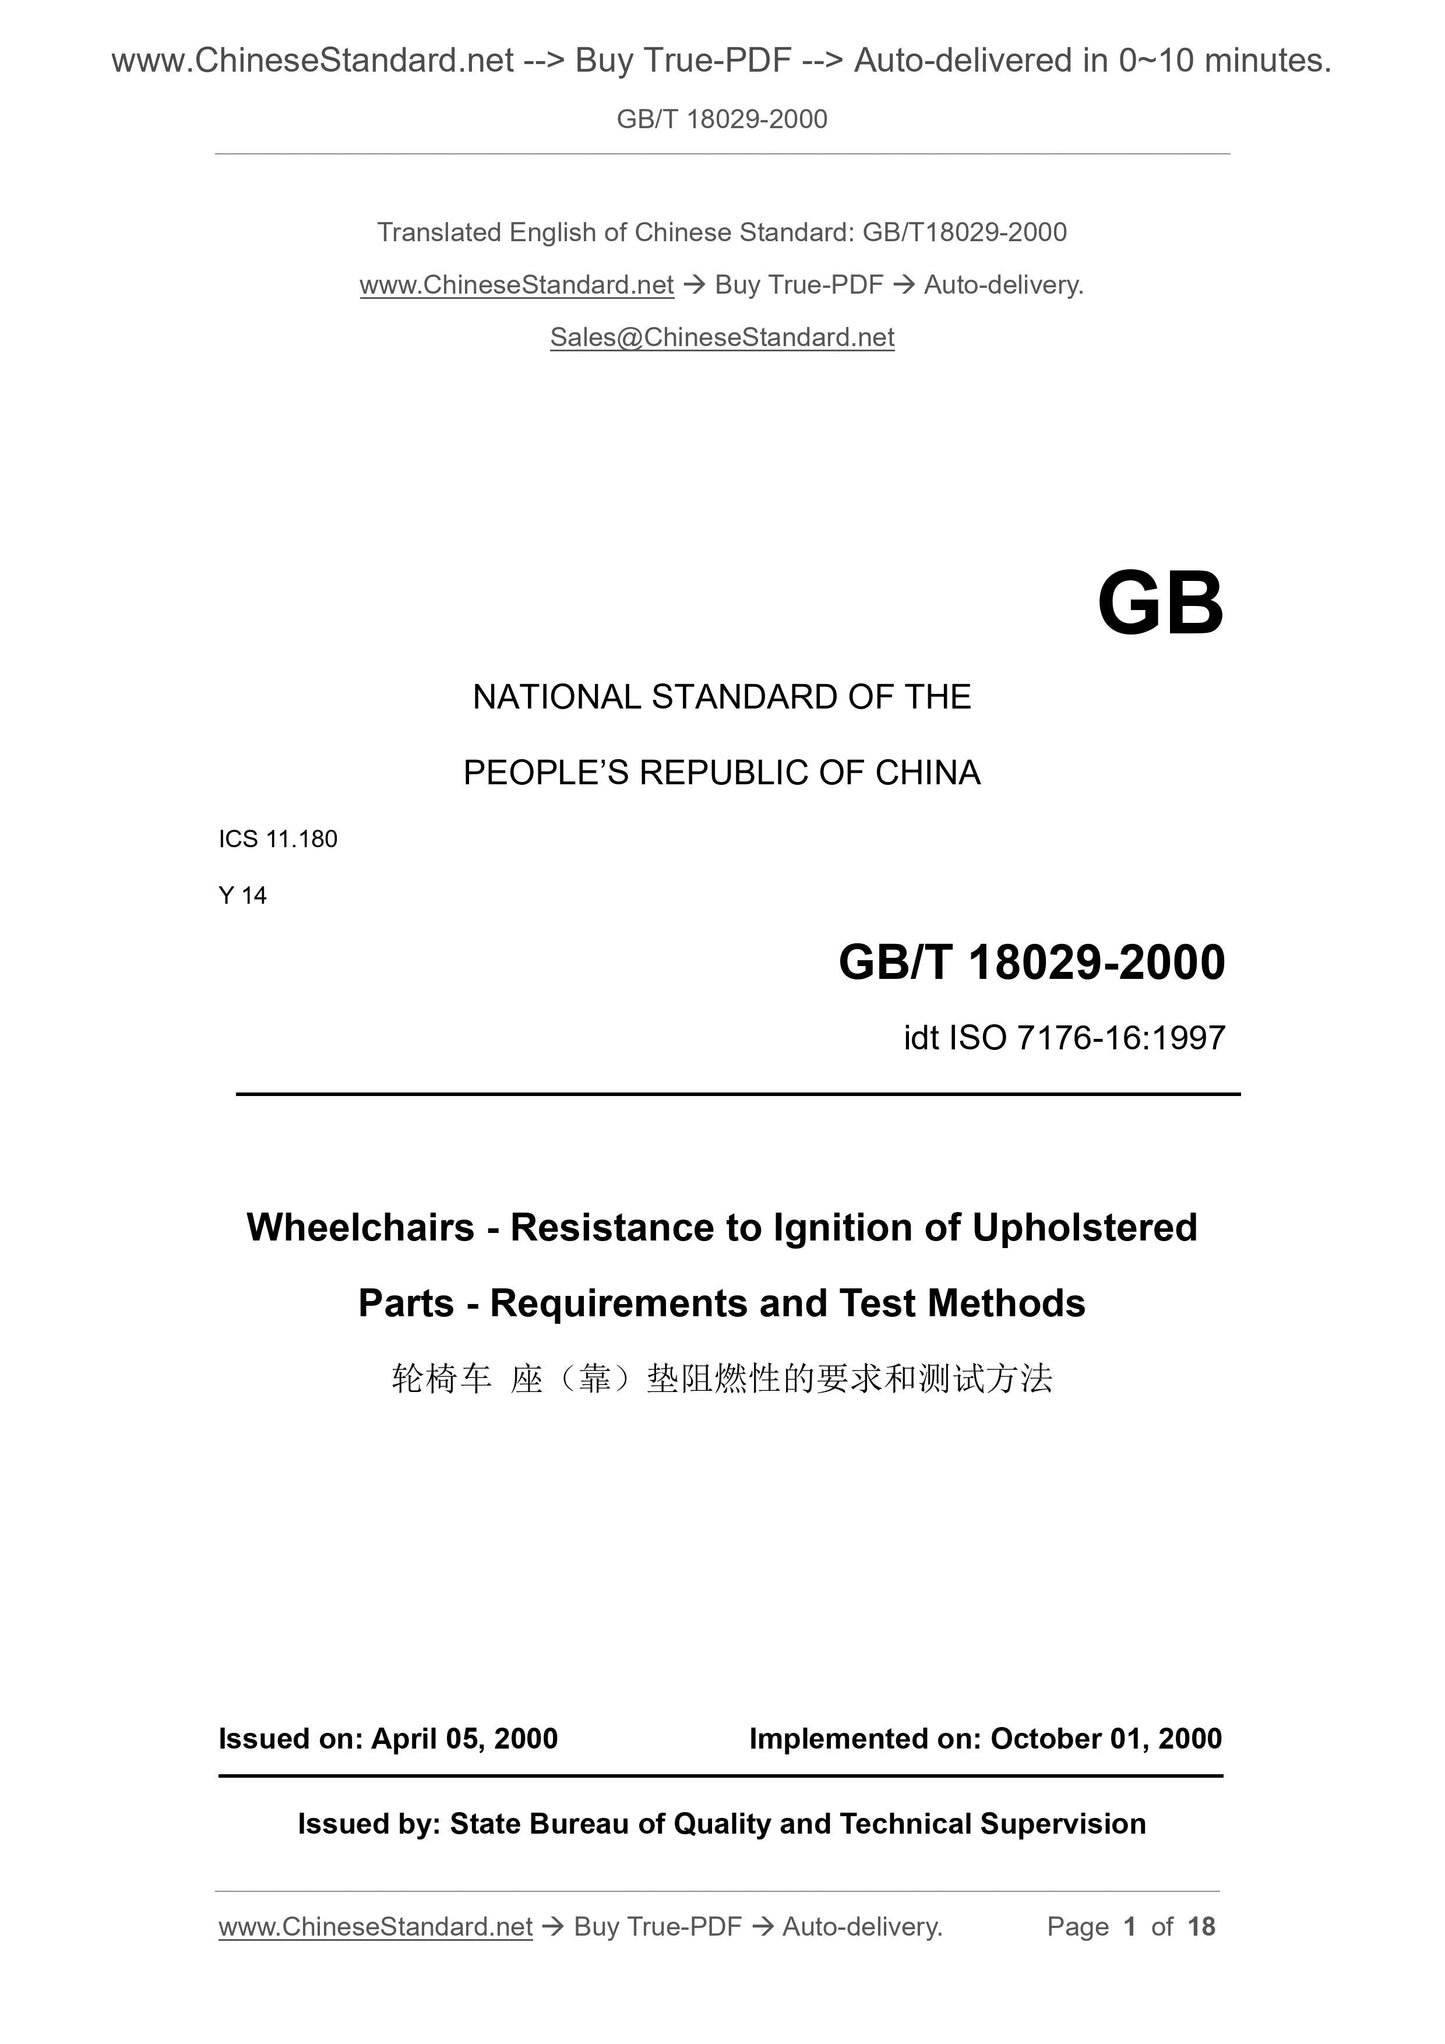 GB/T 18029-2000 Page 1